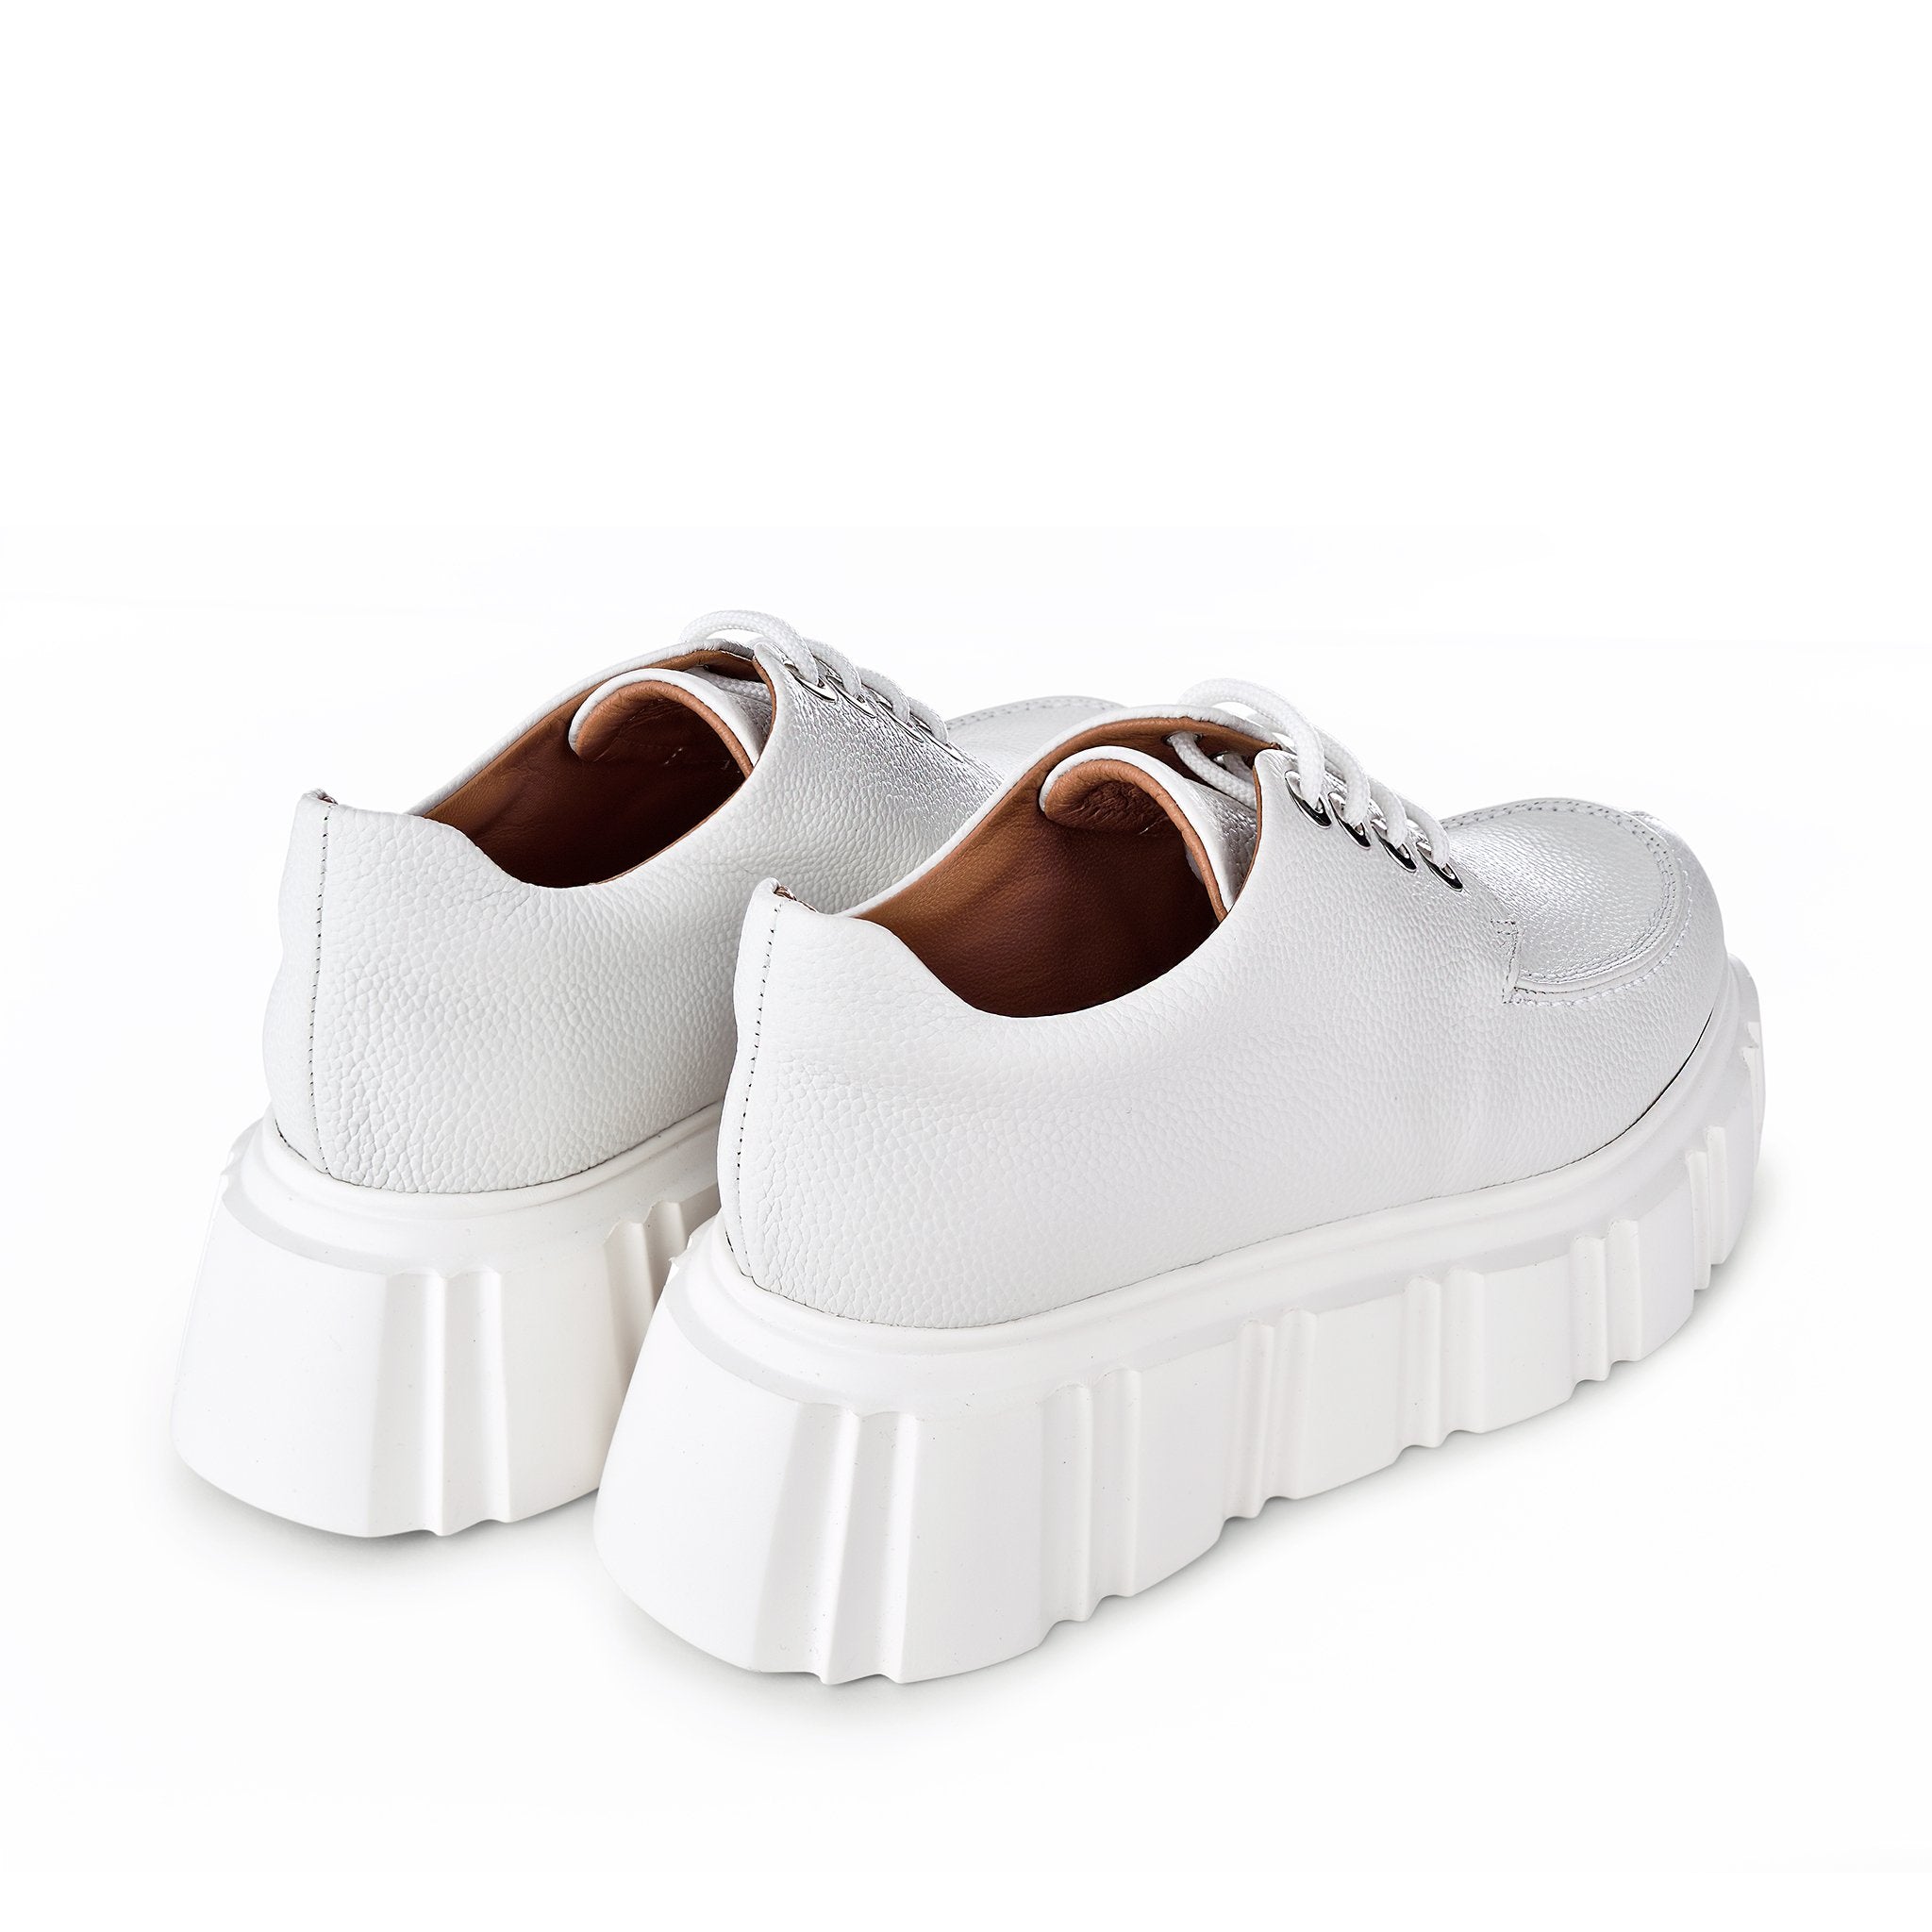 Jun Off White Lace-Up Loafers 2210-02 - 05